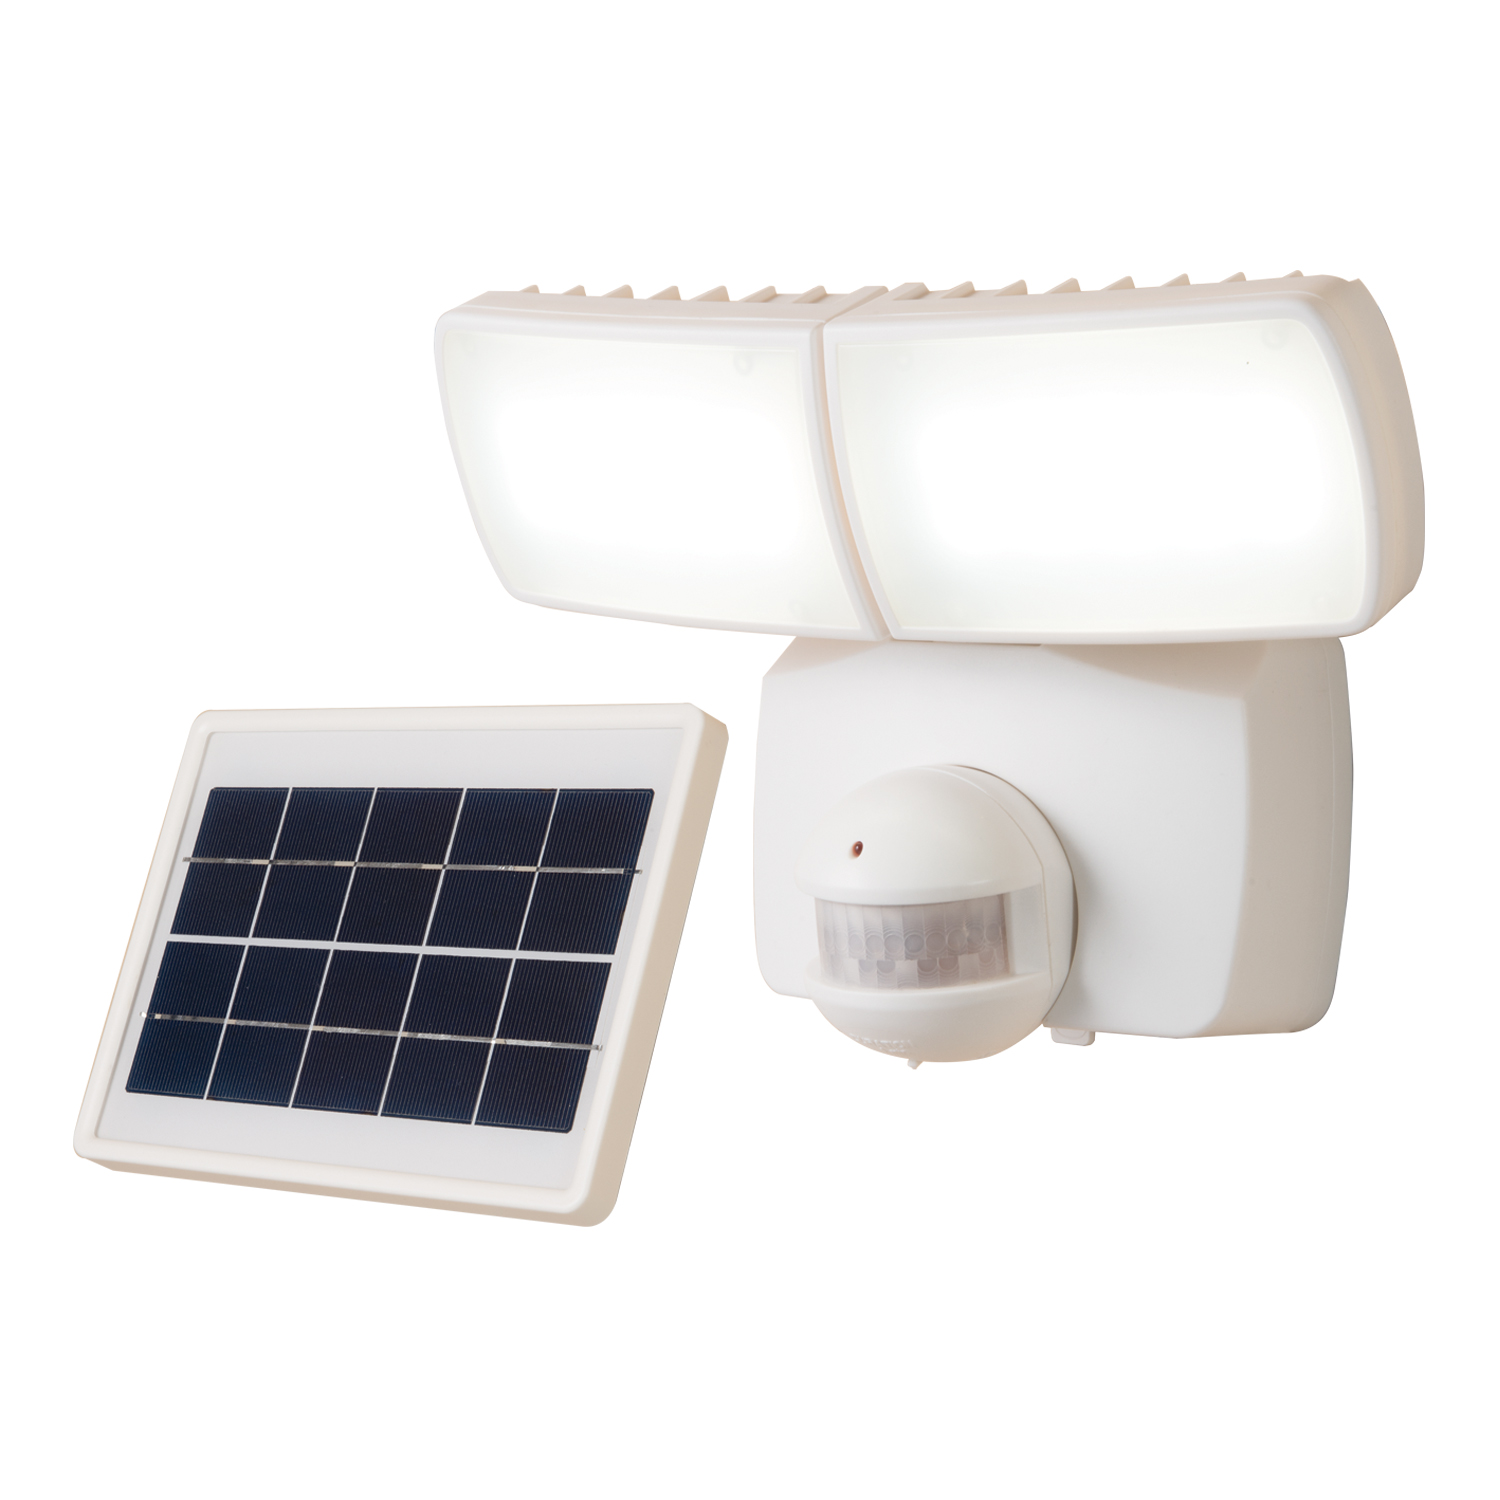 All-Pro and Defiant solar-powered outdoor LED light fixtures